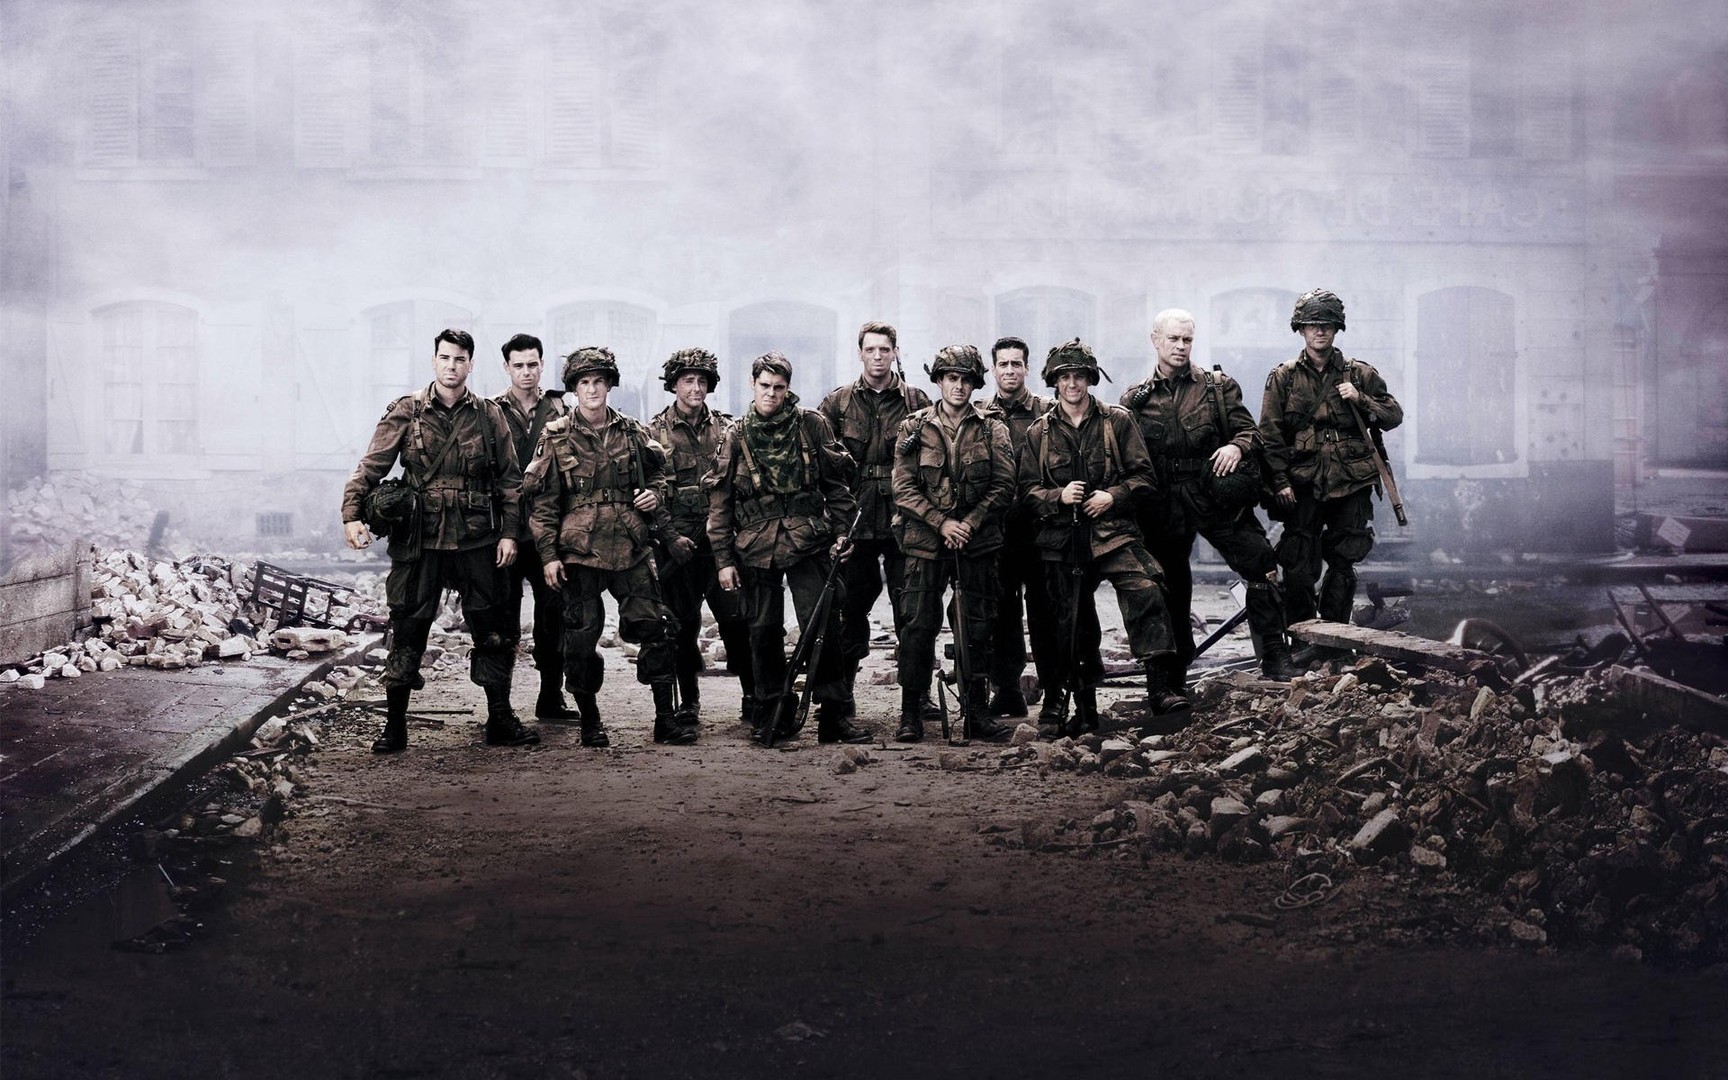 HD desktop wallpaper Tv Show Band Of Brothers download free picture  632030